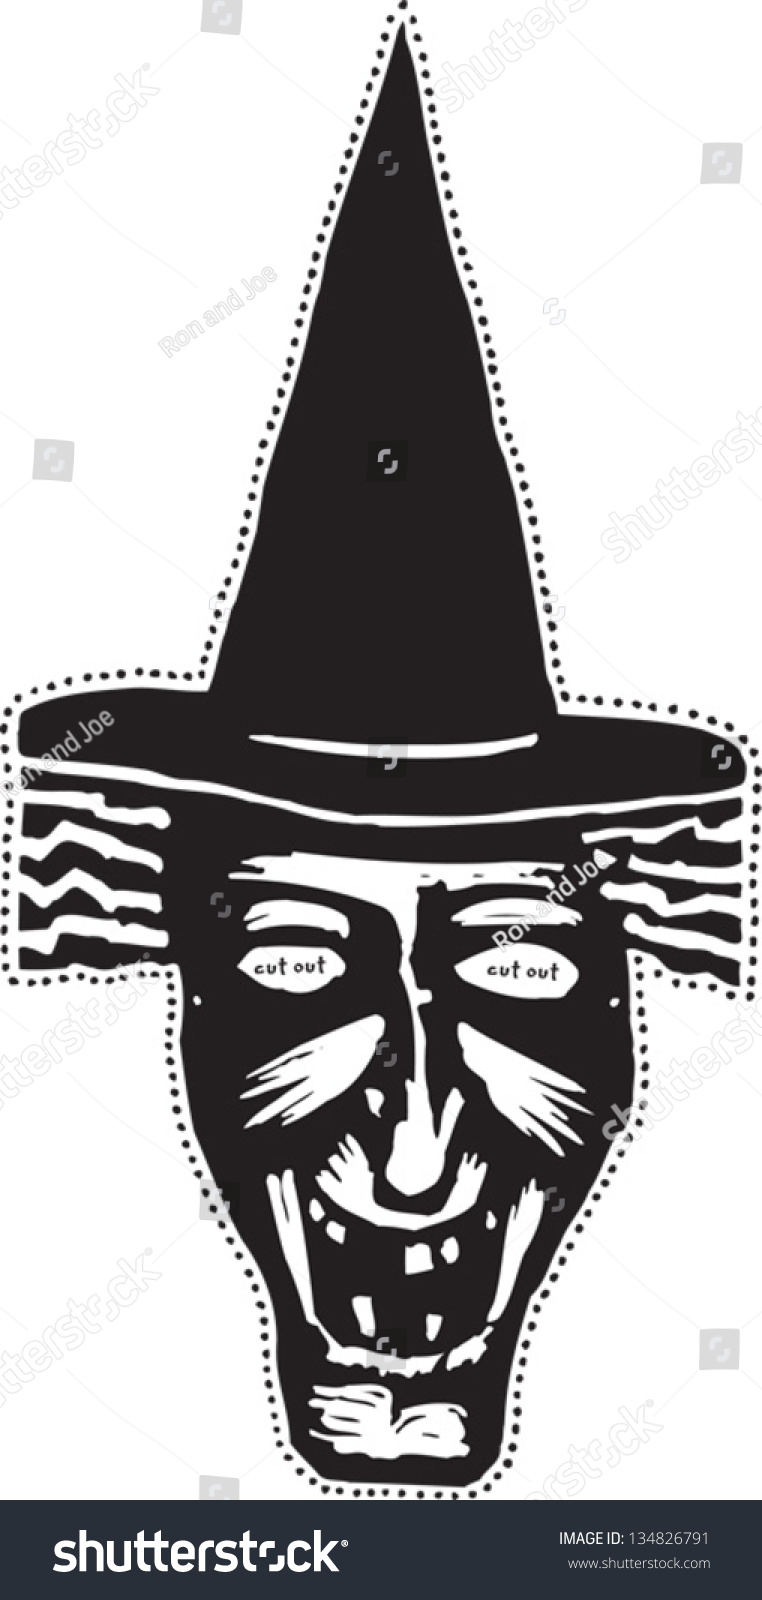 Black White Vector Illustration Witch Mask Stock Vector Royalty Free 134826791 Shutterstock 5062